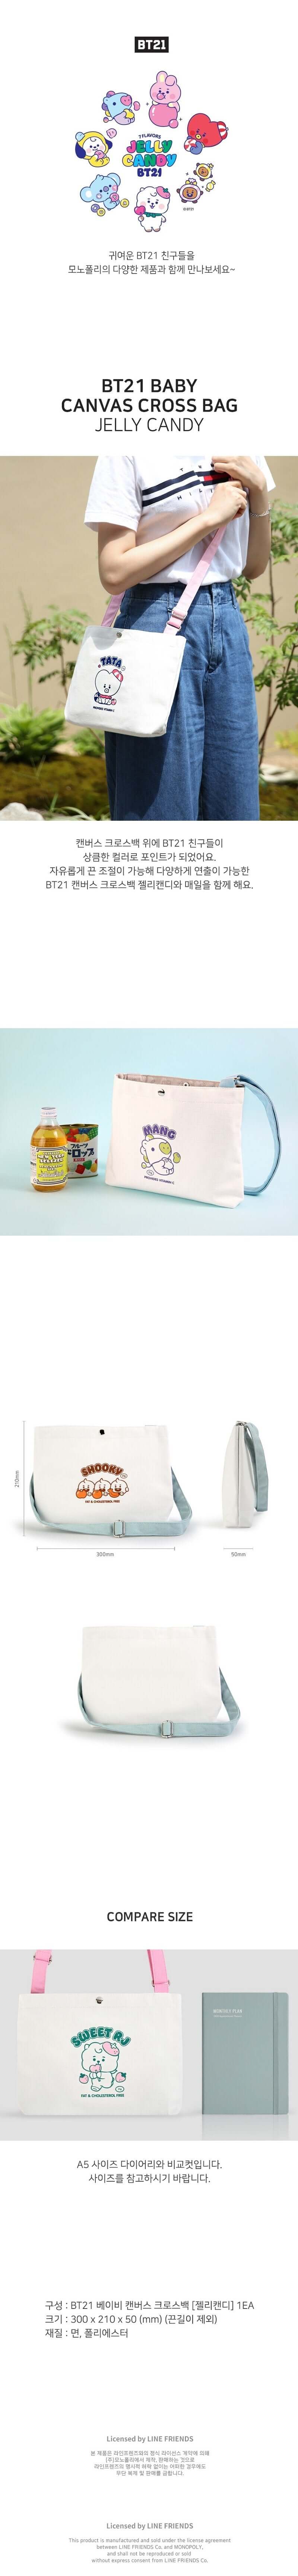 BT21 BABY Canvas Crossbag (Jelly Candy)